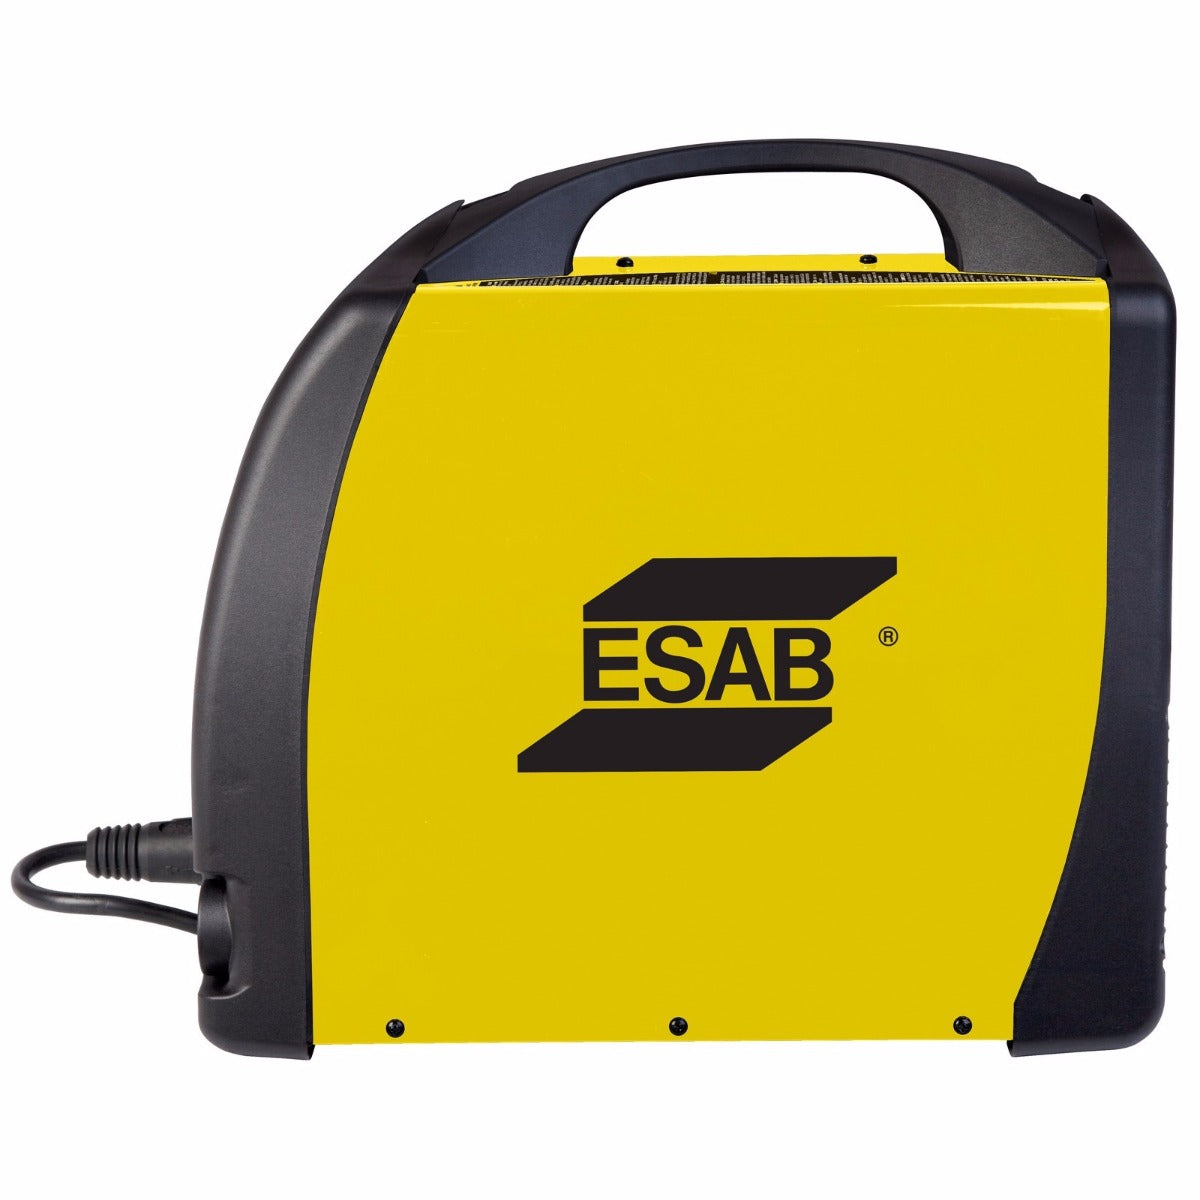 ESAB Fabricator 141i Multi Process Welding System, TIG Torch, and Foot Control (W1003141)